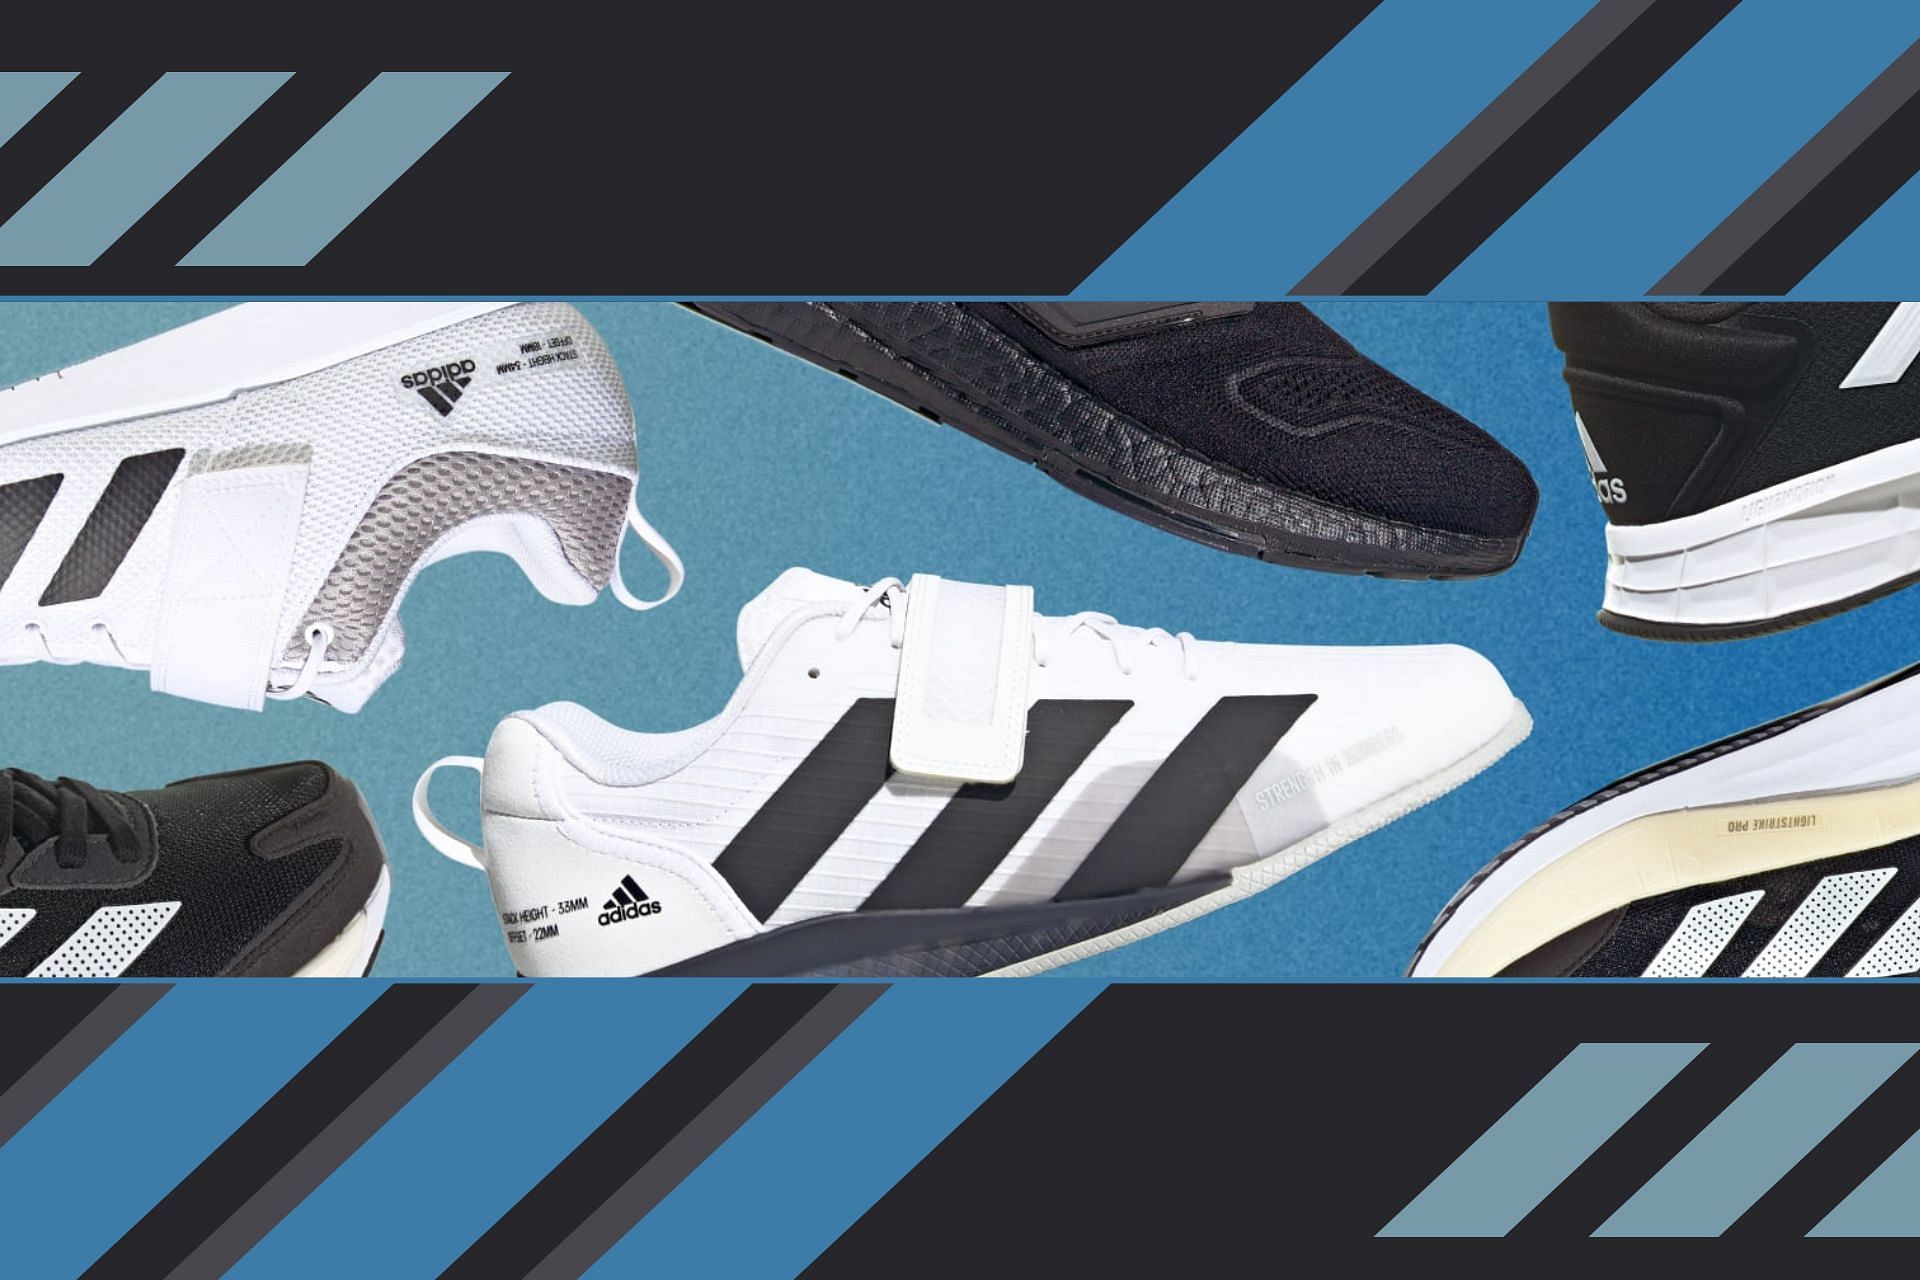 How to choose the best gym shoes (Image via Adidas)